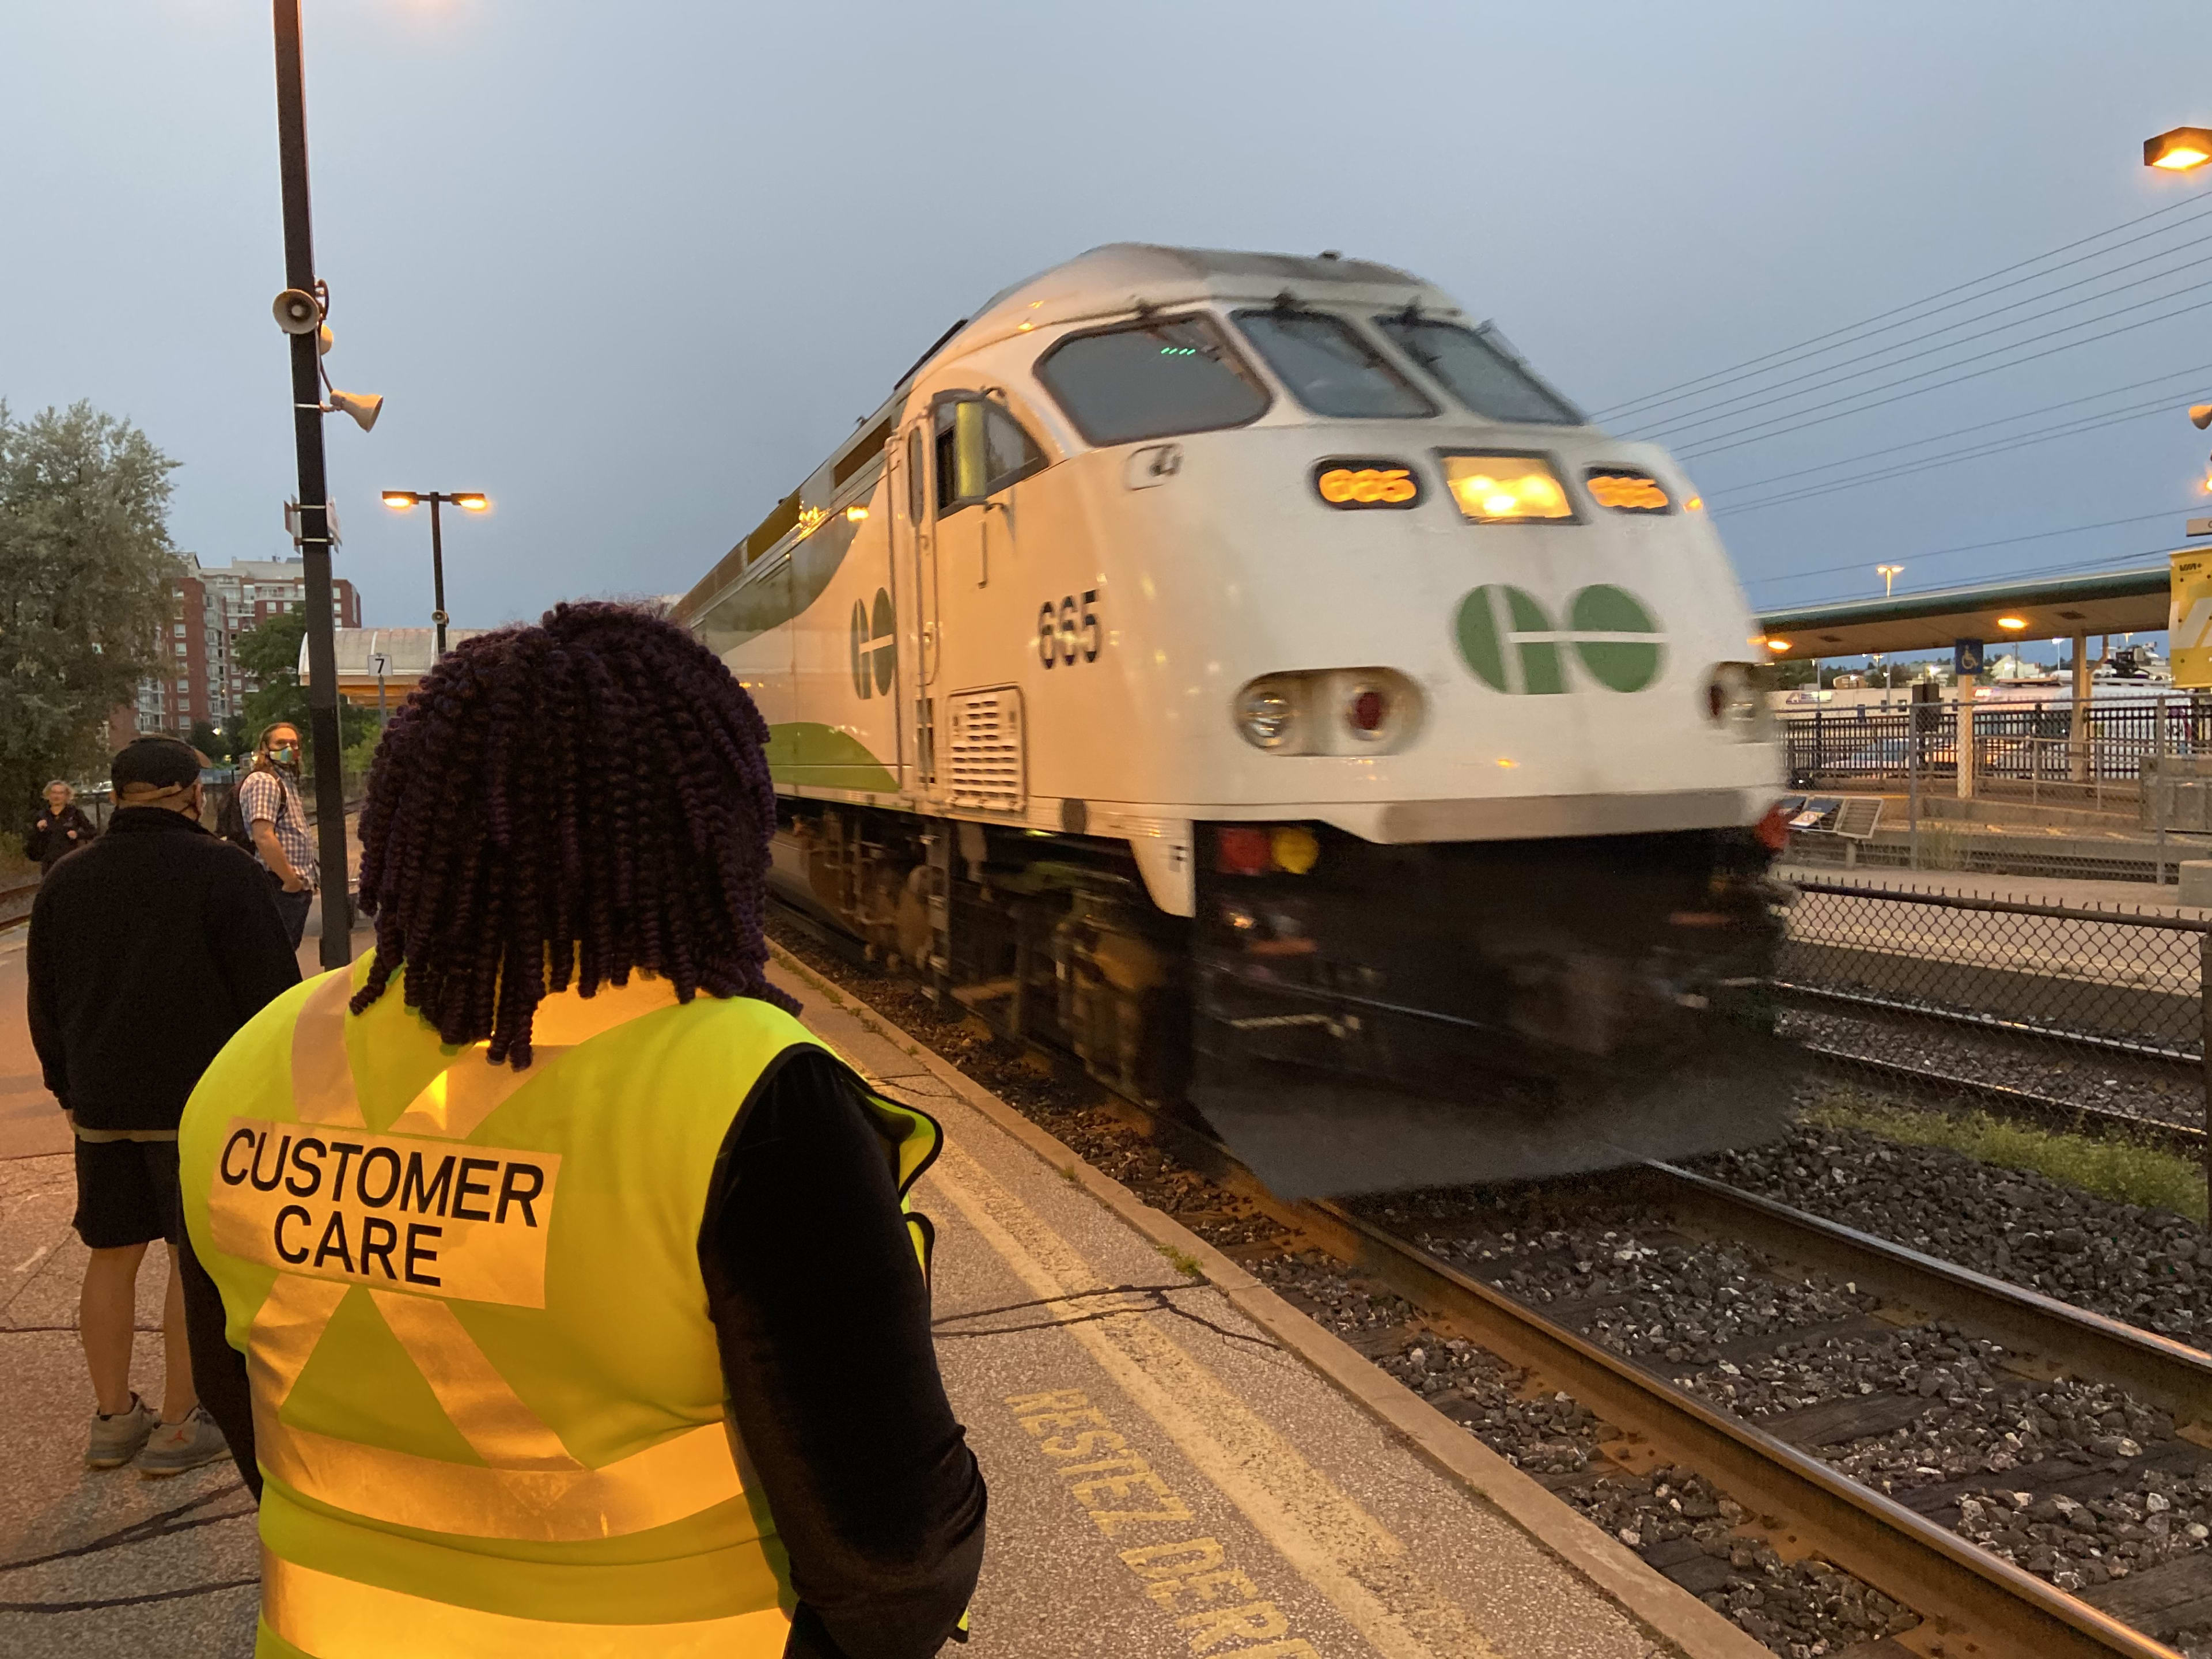 A customer care attendant watches over a platform.